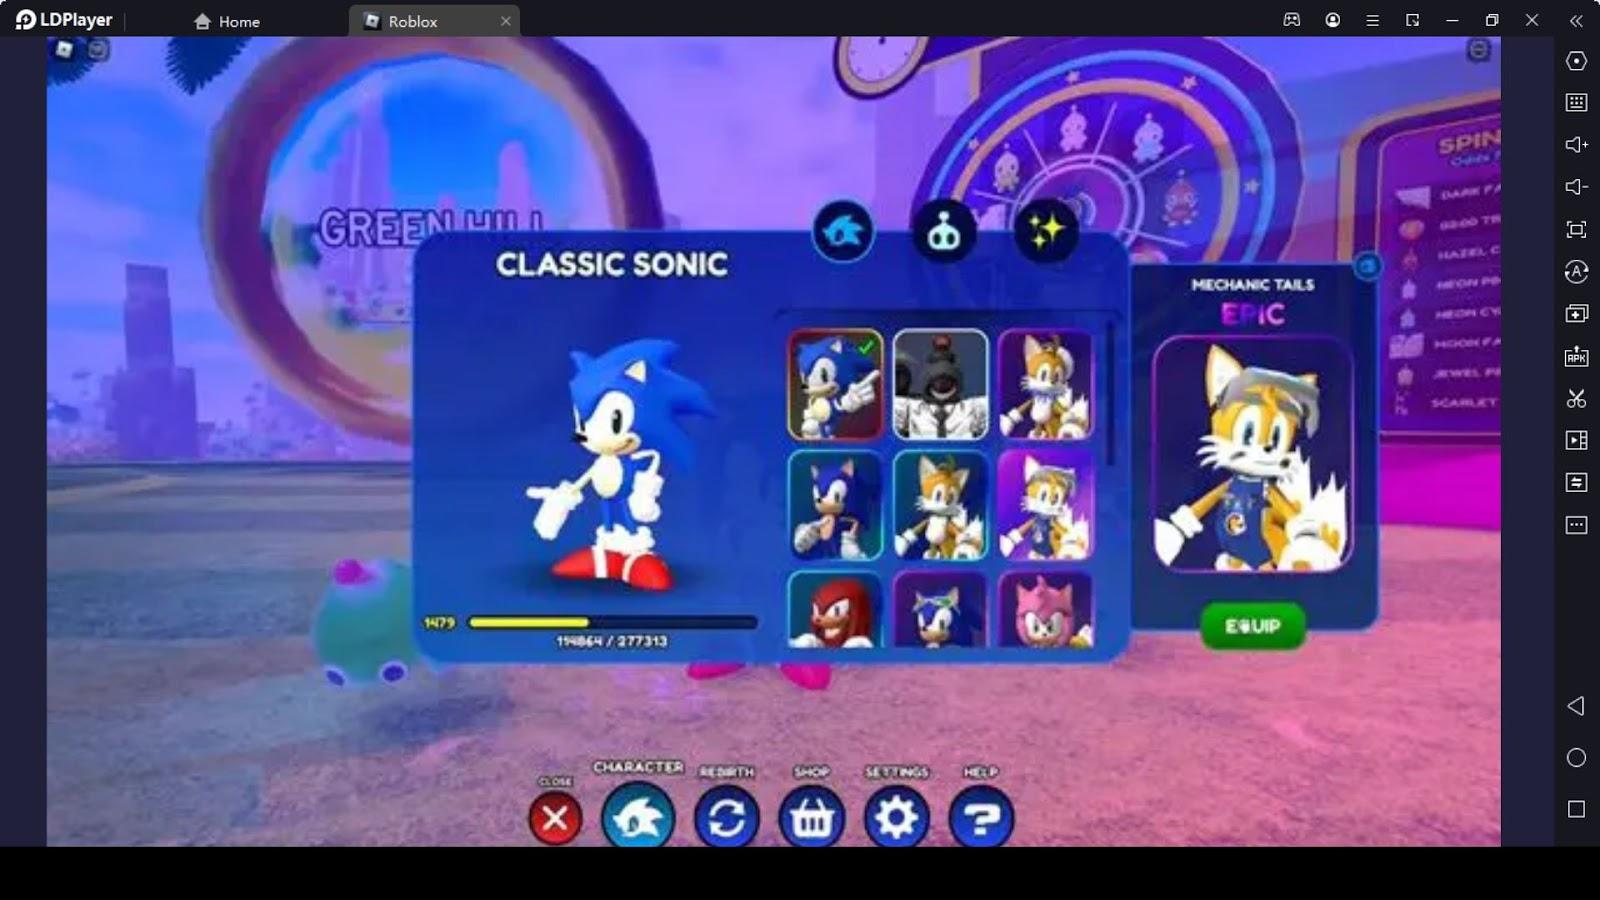 Sonic Speed Simulator - How to get Amy in save Amy event